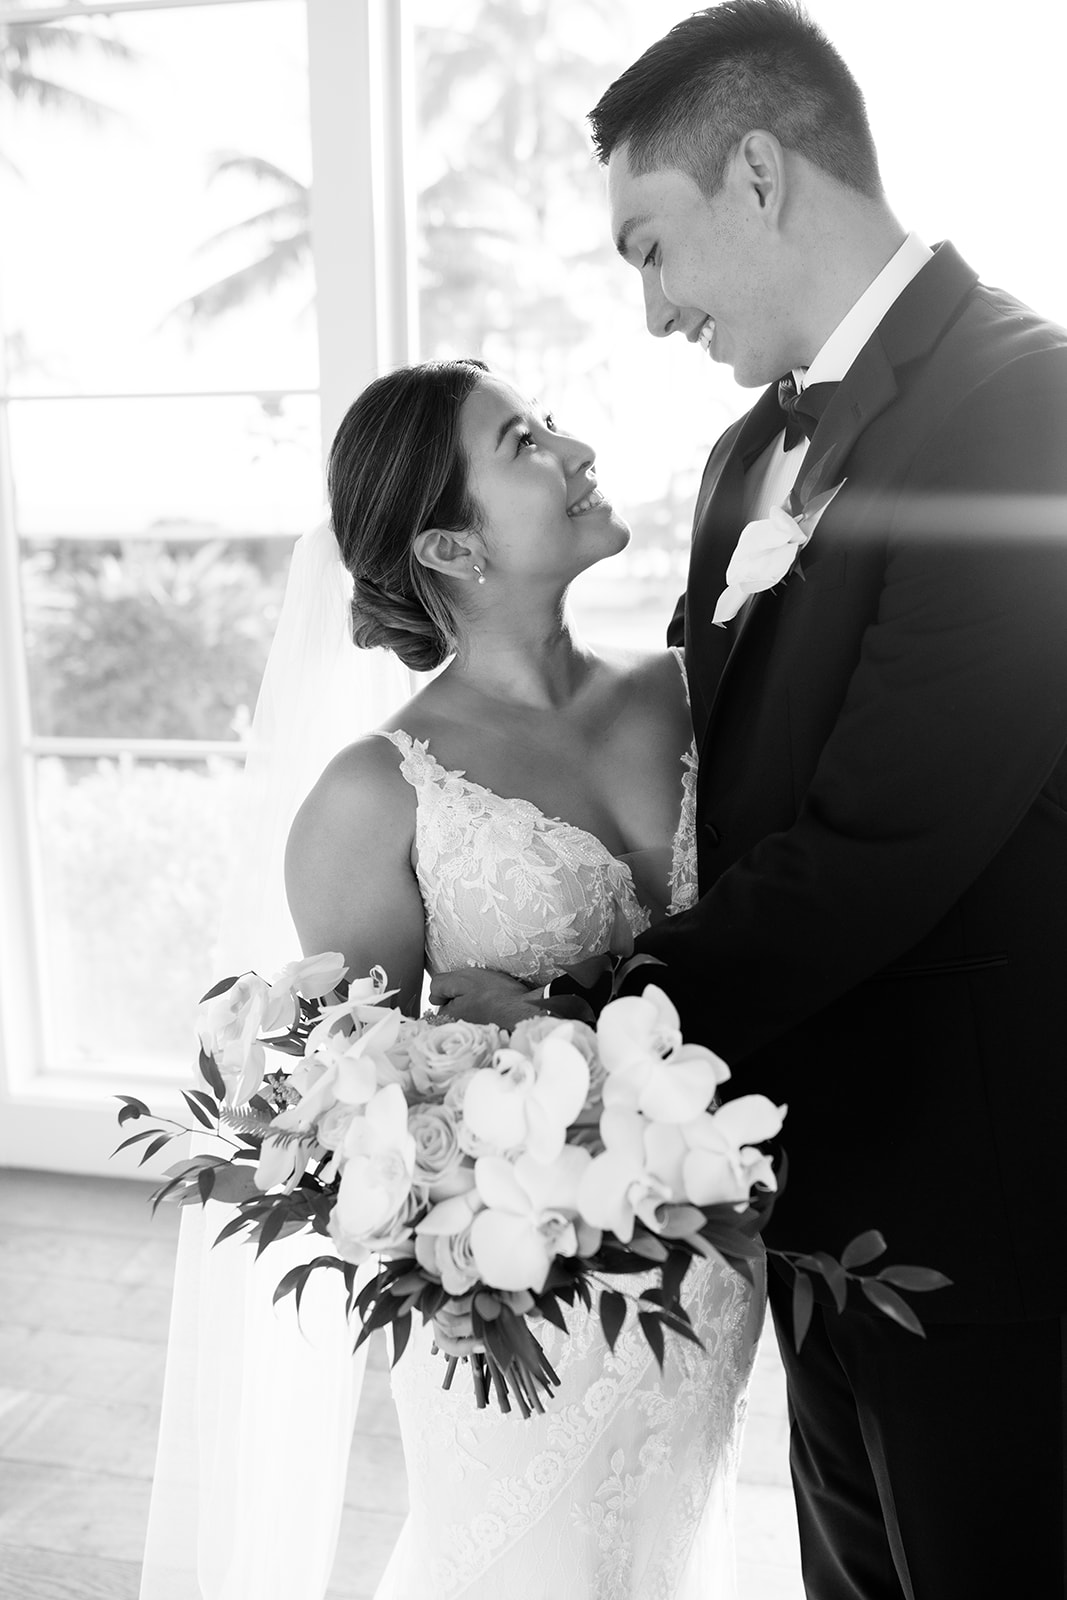 A black and white photo of the newlyweds smiling at each other taken by Megan Moura Wedding Photographer